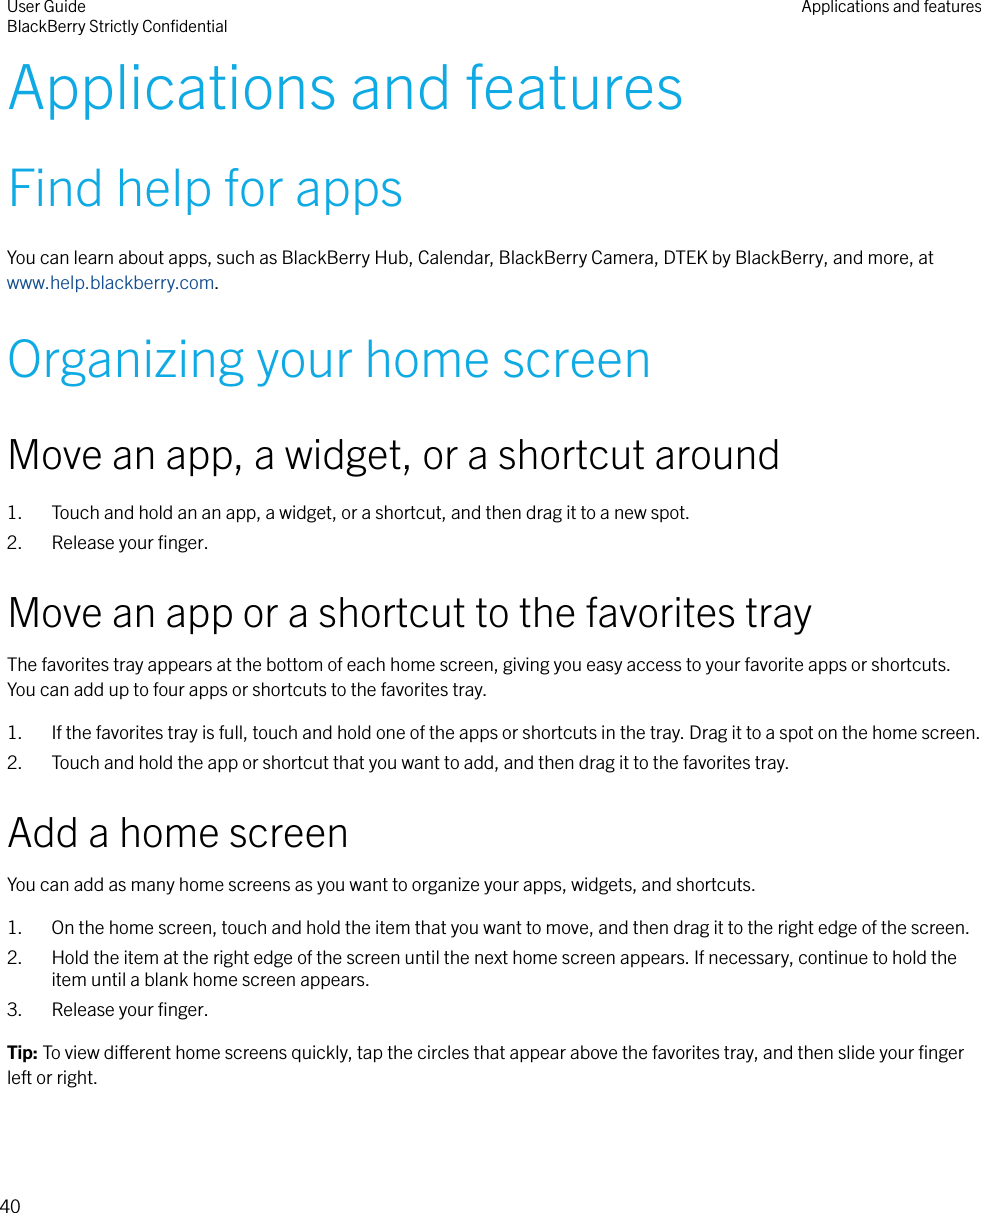 Applications and featuresFind help for appsYou can learn about apps, such as BlackBerry Hub, Calendar, BlackBerry Camera, DTEK by BlackBerry, and more, at www.help.blackberry.com.Organizing your home screenMove an app, a widget, or a shortcut around1. Touch and hold an an app, a widget, or a shortcut, and then drag it to a new spot.2. Release your ﬁnger.Move an app or a shortcut to the favorites trayThe favorites tray appears at the bottom of each home screen, giving you easy access to your favorite apps or shortcuts.You can add up to four apps or shortcuts to the favorites tray.1. If the favorites tray is full, touch and hold one of the apps or shortcuts in the tray. Drag it to a spot on the home screen.2. Touch and hold the app or shortcut that you want to add, and then drag it to the favorites tray.Add a home screenYou can add as many home screens as you want to organize your apps, widgets, and shortcuts.1. On the home screen, touch and hold the item that you want to move, and then drag it to the right edge of the screen.2. Hold the item at the right edge of the screen until the next home screen appears. If necessary, continue to hold theitem until a blank home screen appears.3. Release your ﬁnger.Tip: To view dierent home screens quickly, tap the circles that appear above the favorites tray, and then slide your ﬁngerleft or right.User GuideBlackBerry Strictly ConﬁdentialApplications and features40